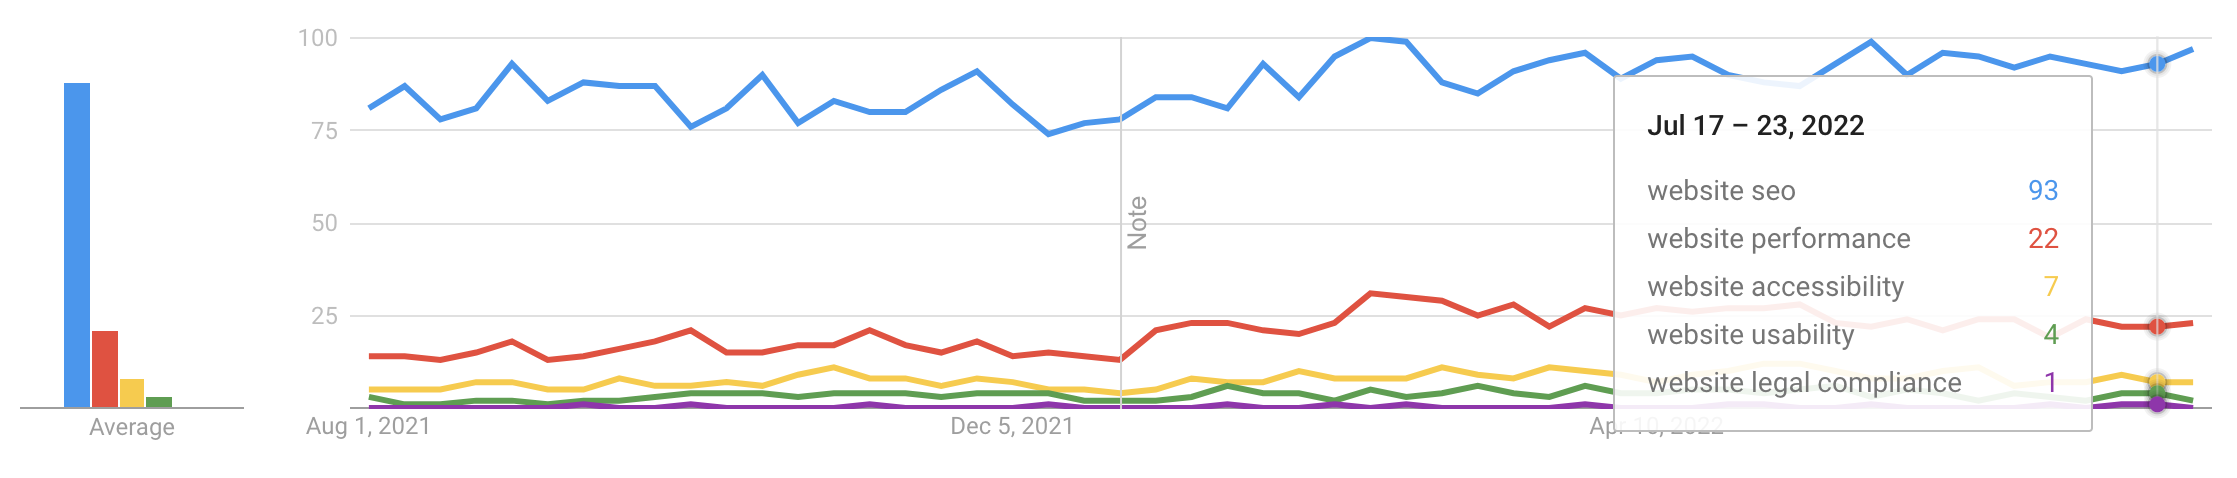 Google Trends comparison of website SEO, performance, accessibility, usability, and legal compliance searches.